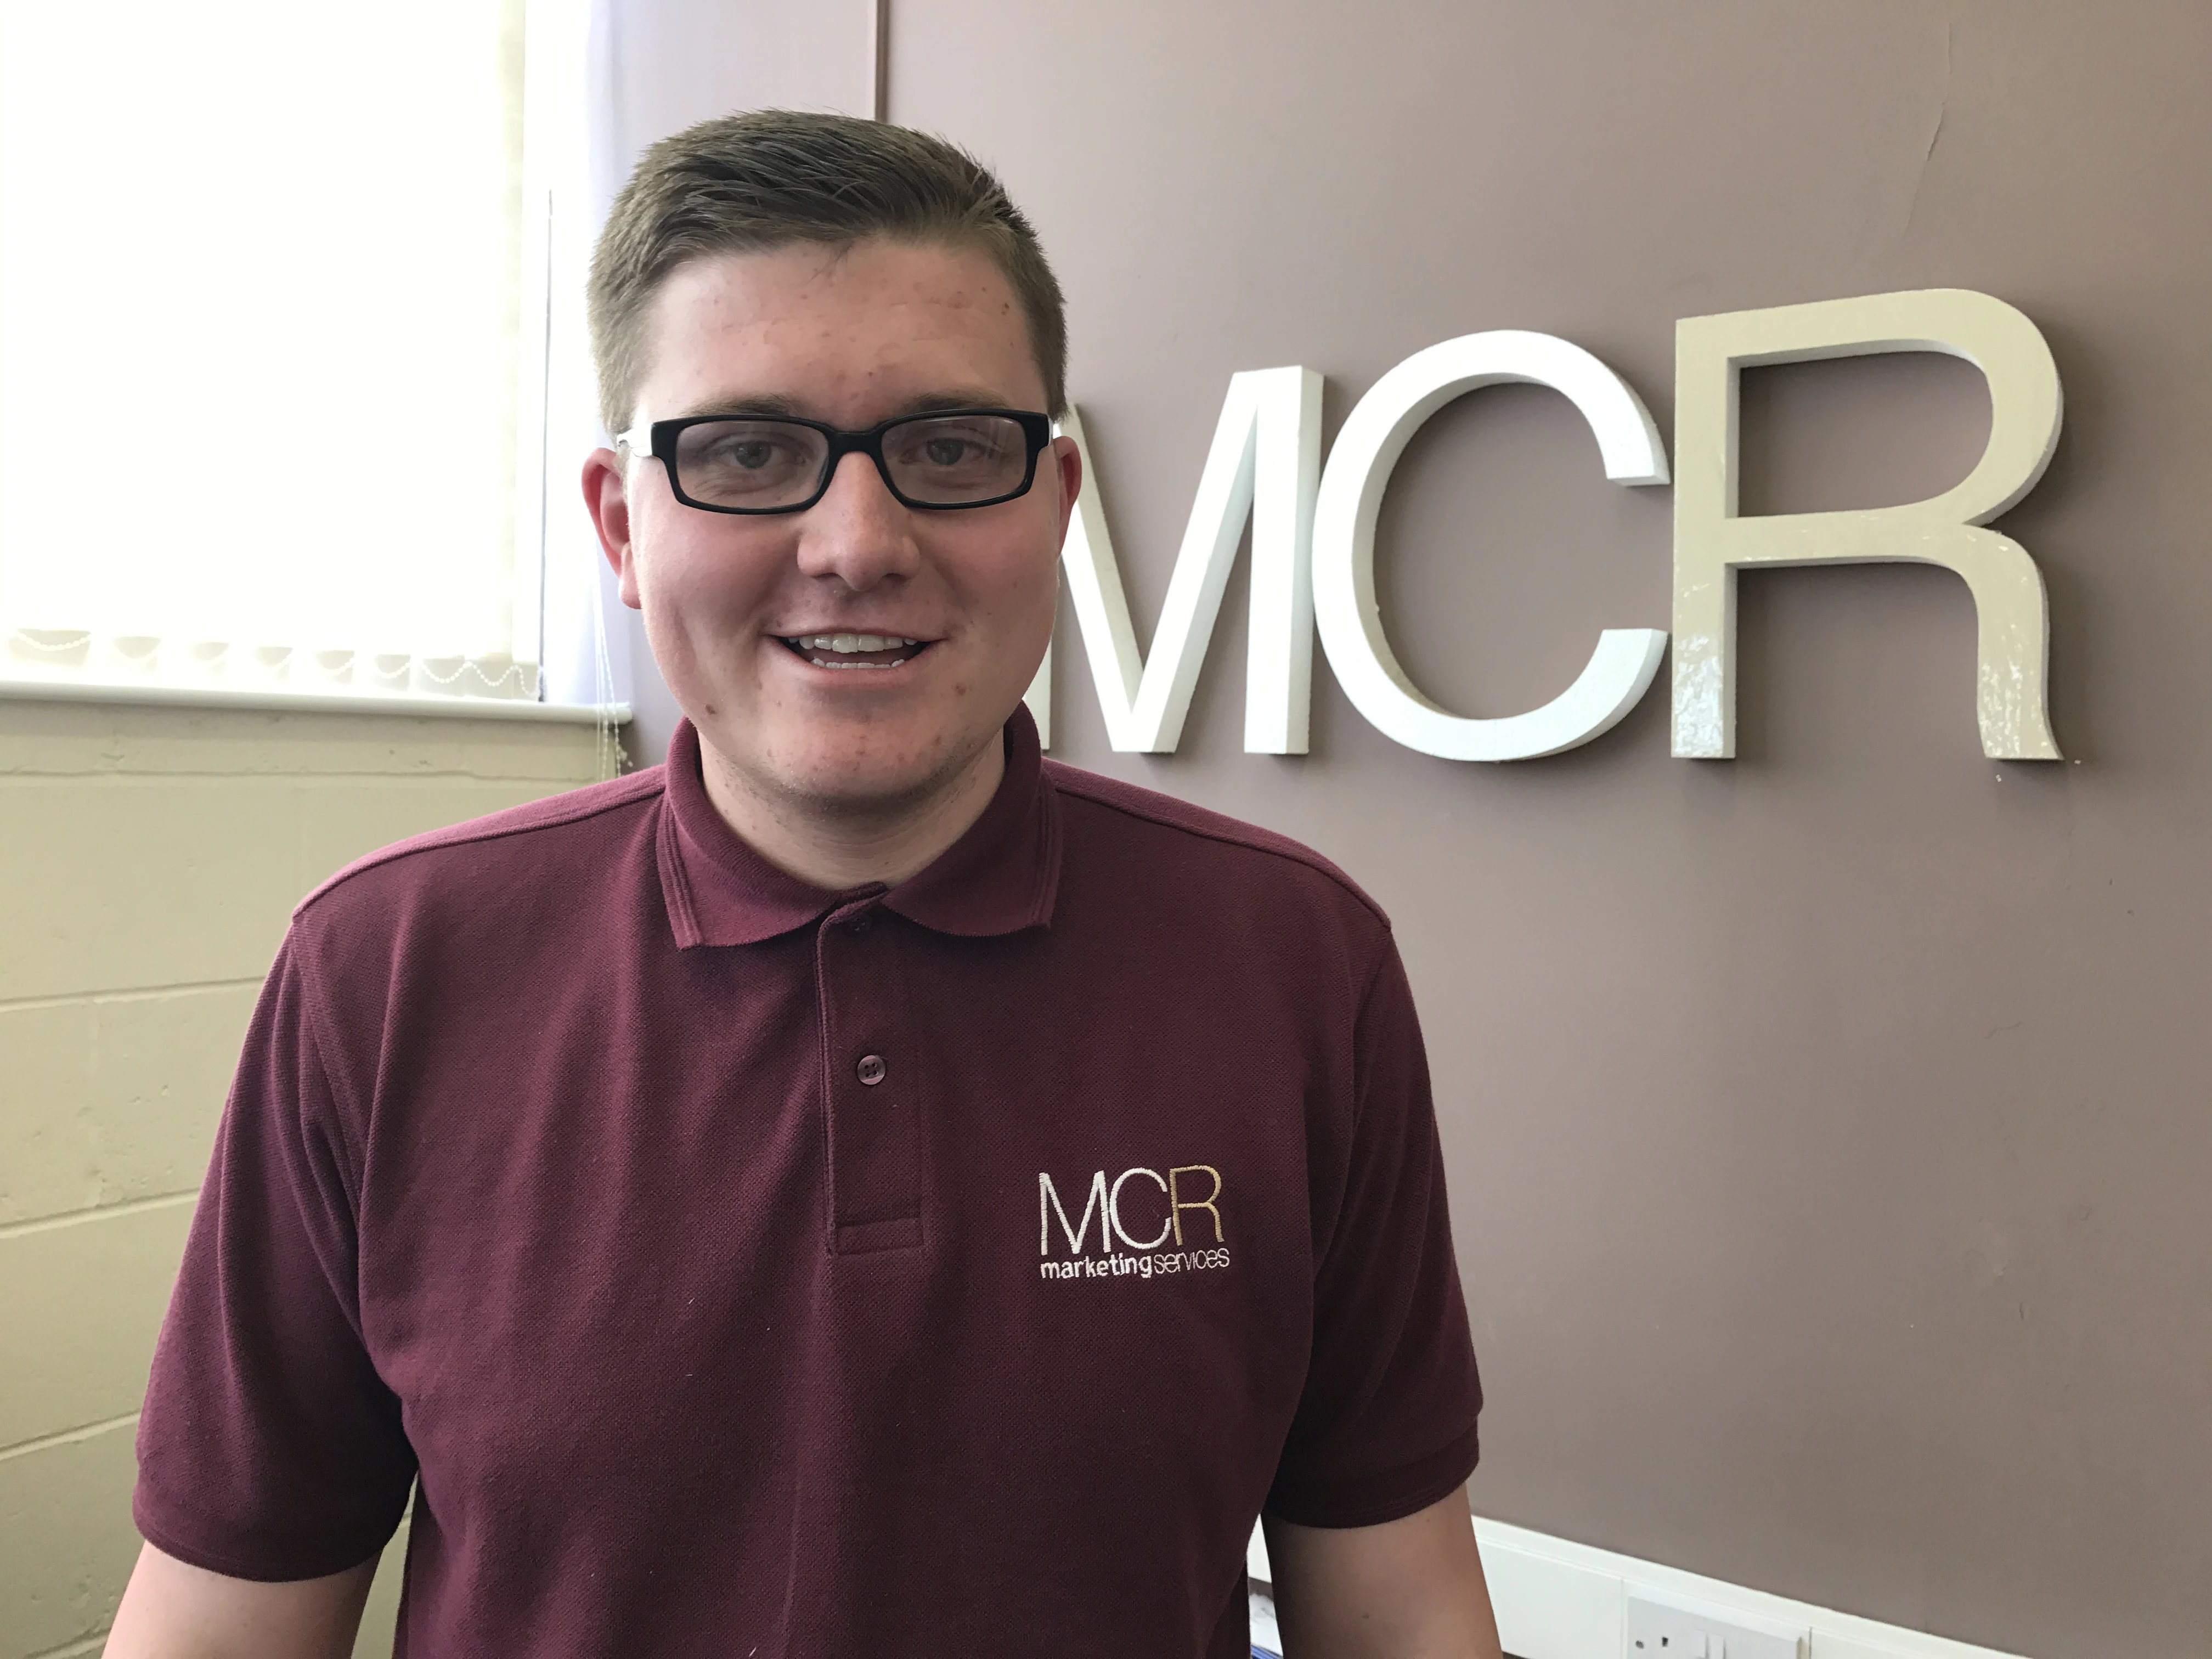 Matthew Fretwell is delighted at being shortlisted for Apprentice of the Year